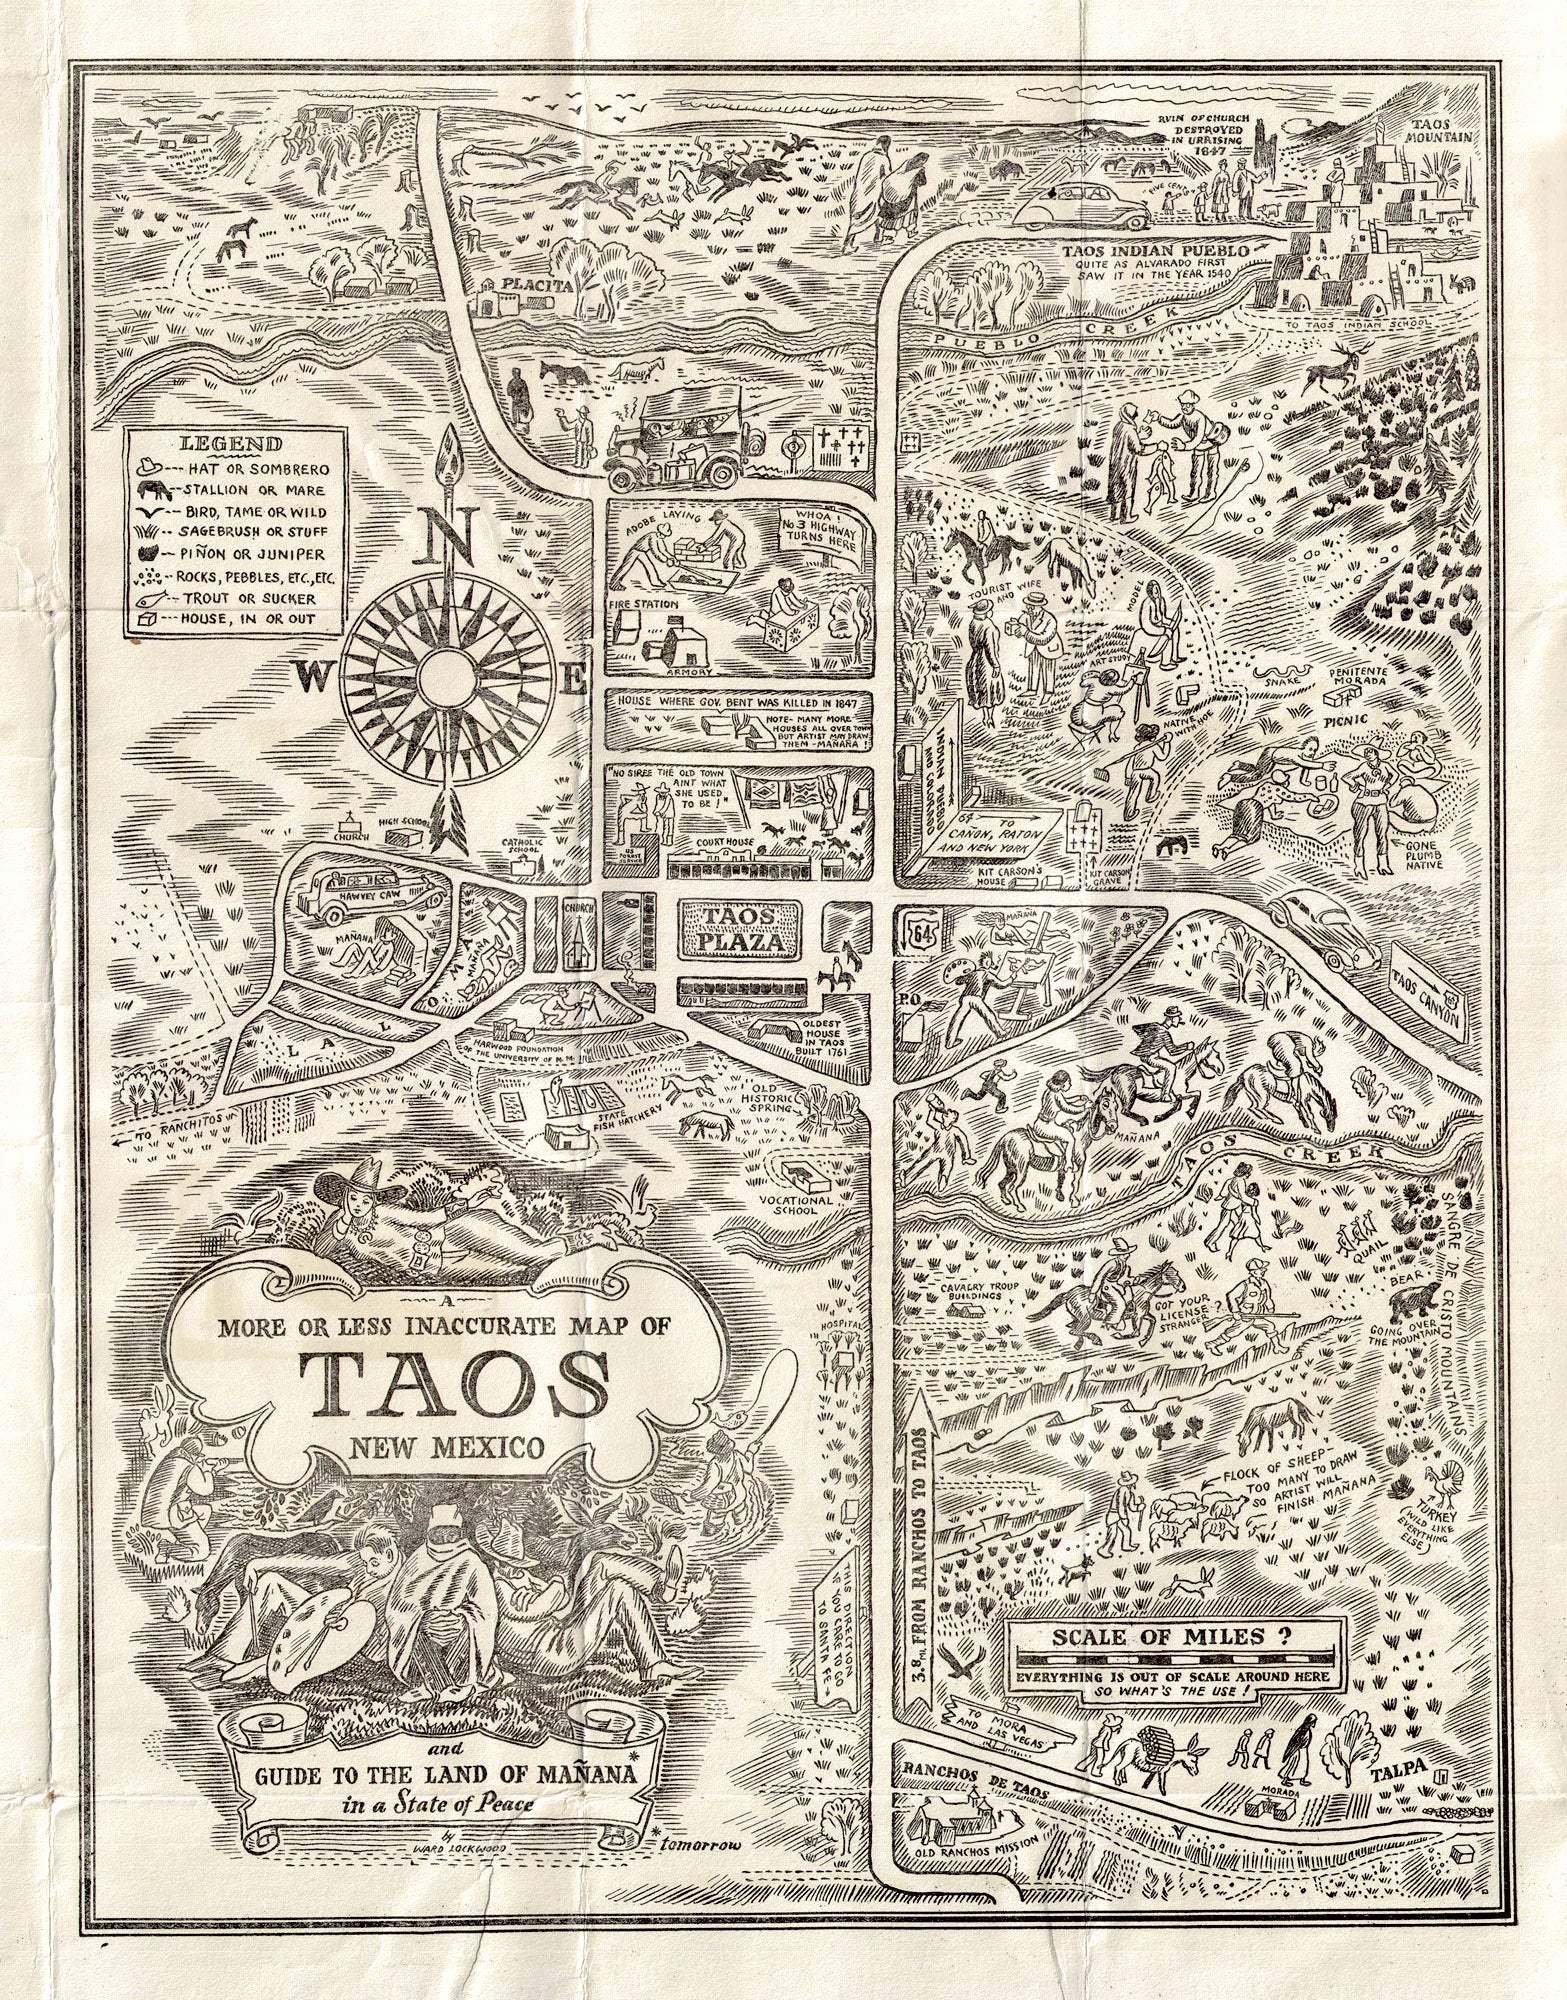 (NM.) A More of Less Inaccurate Map of Taos New Mexico and Guide To The Land of Mañana in a State of Peace